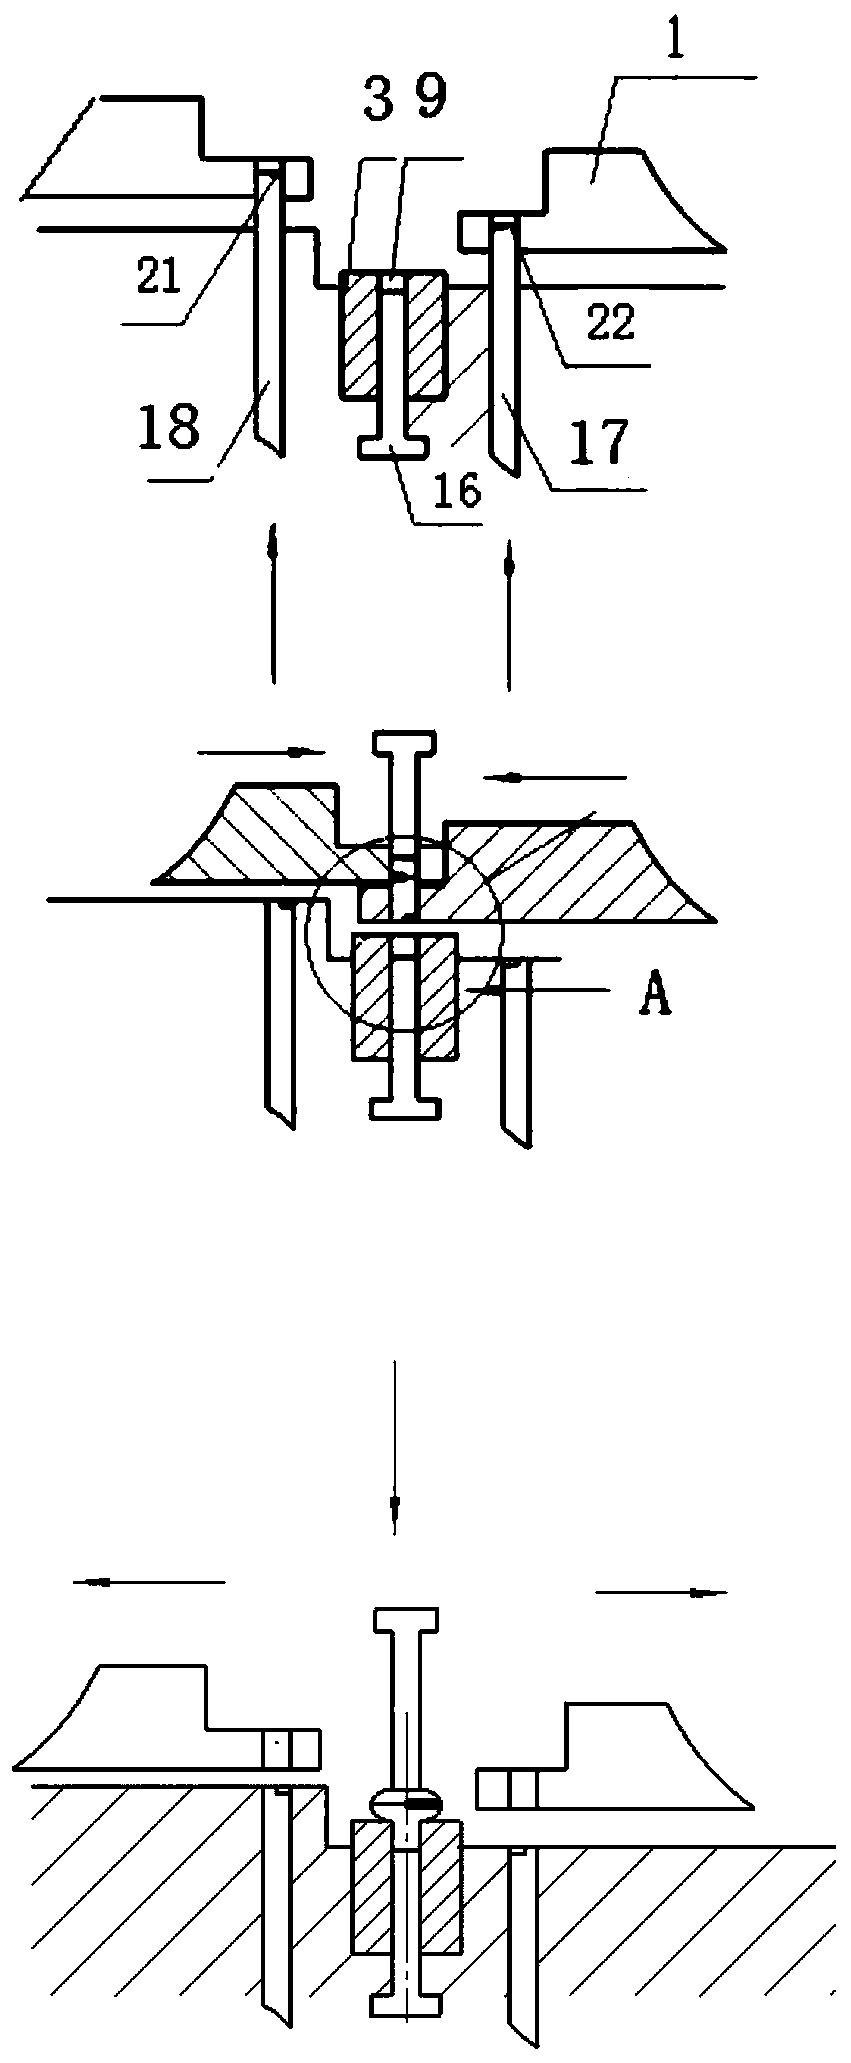 A composite electrical contact device suitable for making thin silver layers